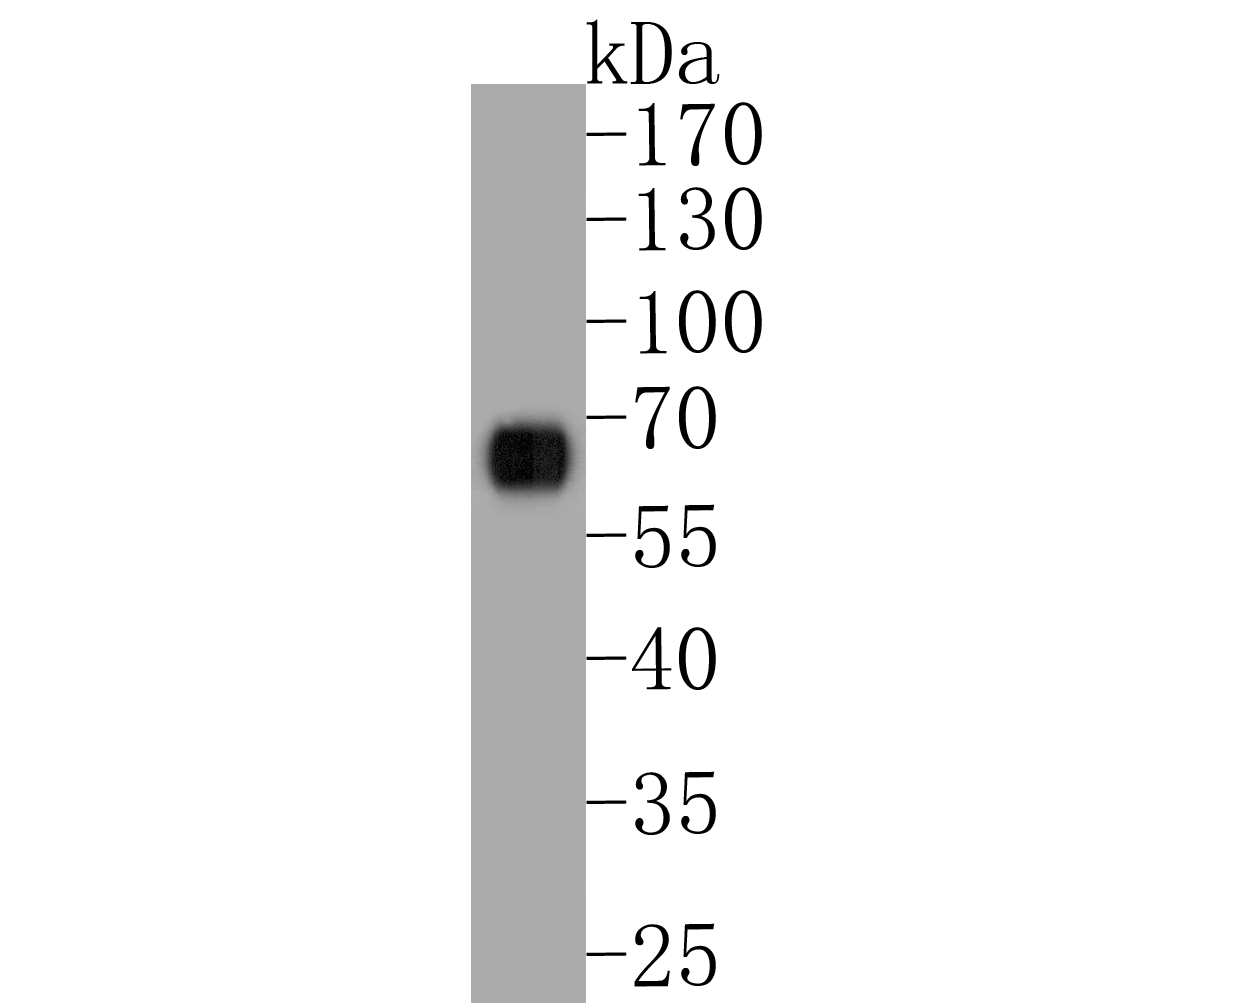 Western blot analysis of GSDMC on human stomach tissue lysates. Proteins were transferred to a PVDF membrane and blocked with 5% BSA in PBS for 1 hour at room temperature. The primary antibody (ER1902-22, 1/1,000) was used in 5% BSA at room temperature for 2 hours. Goat Anti-Rabbit IgG - HRP Secondary Antibody (HA1001) at 1:5,000 dilution was used for 1 hour at room temperature.